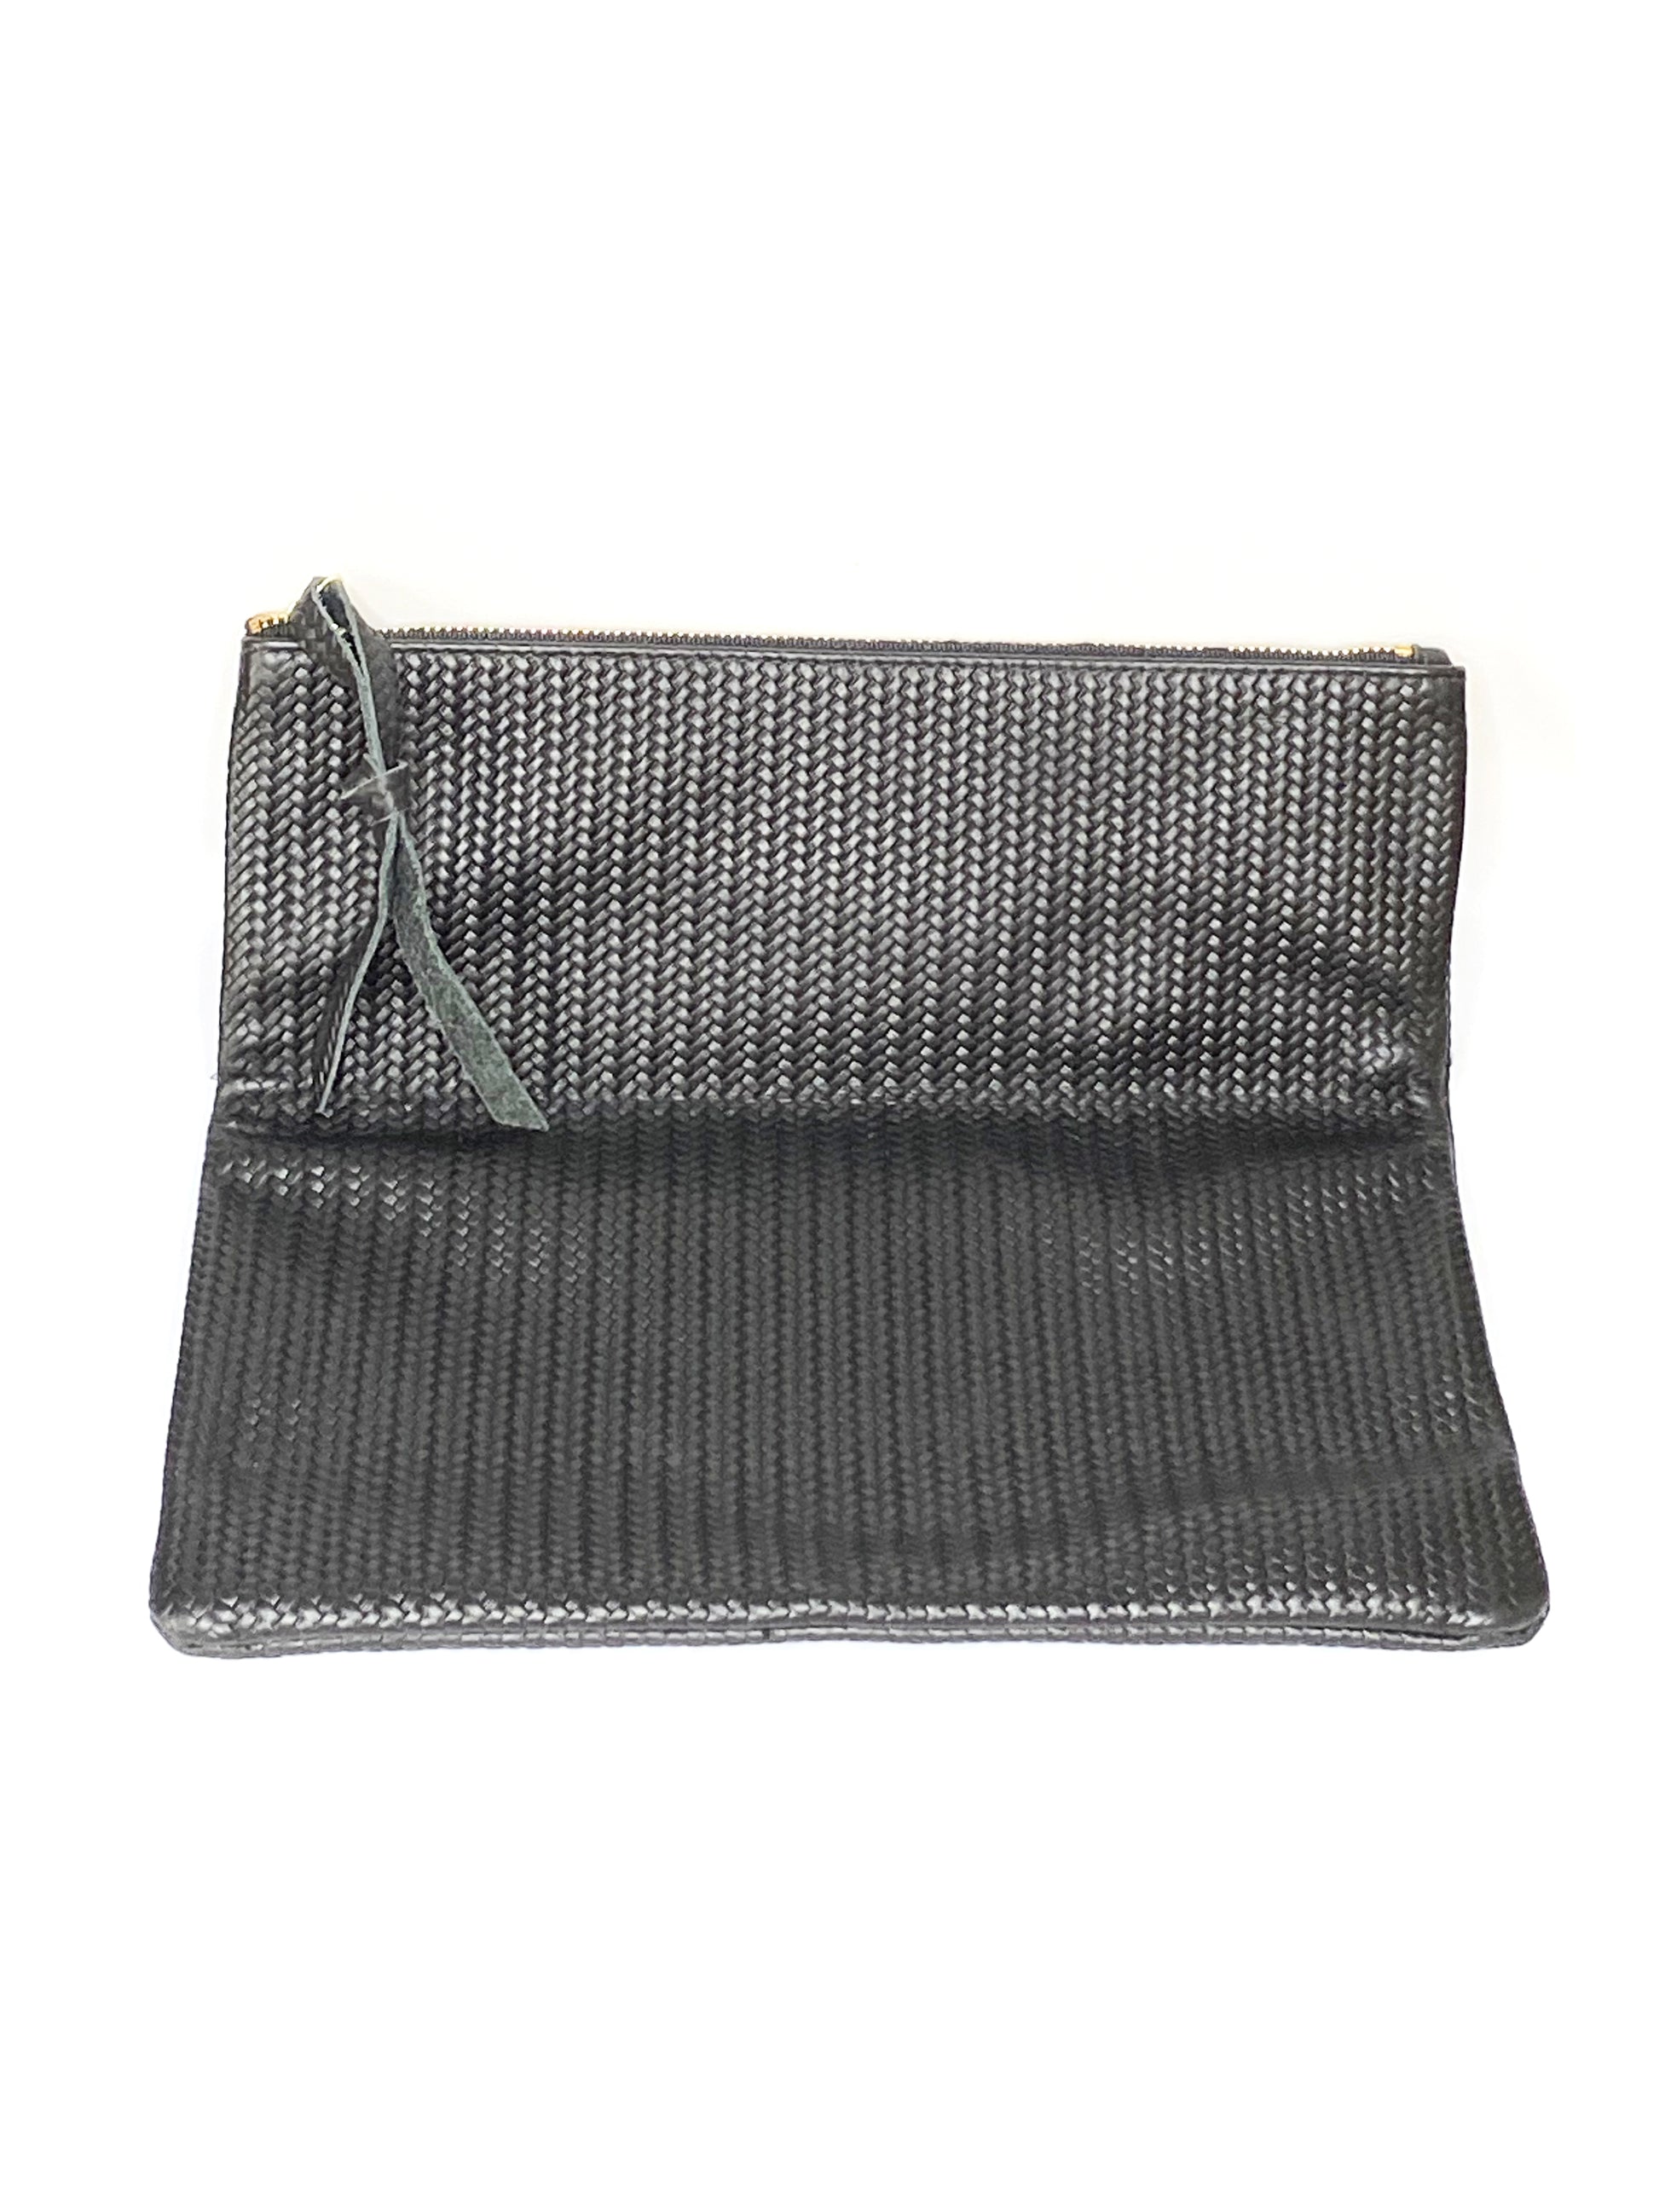 black leather clutch open